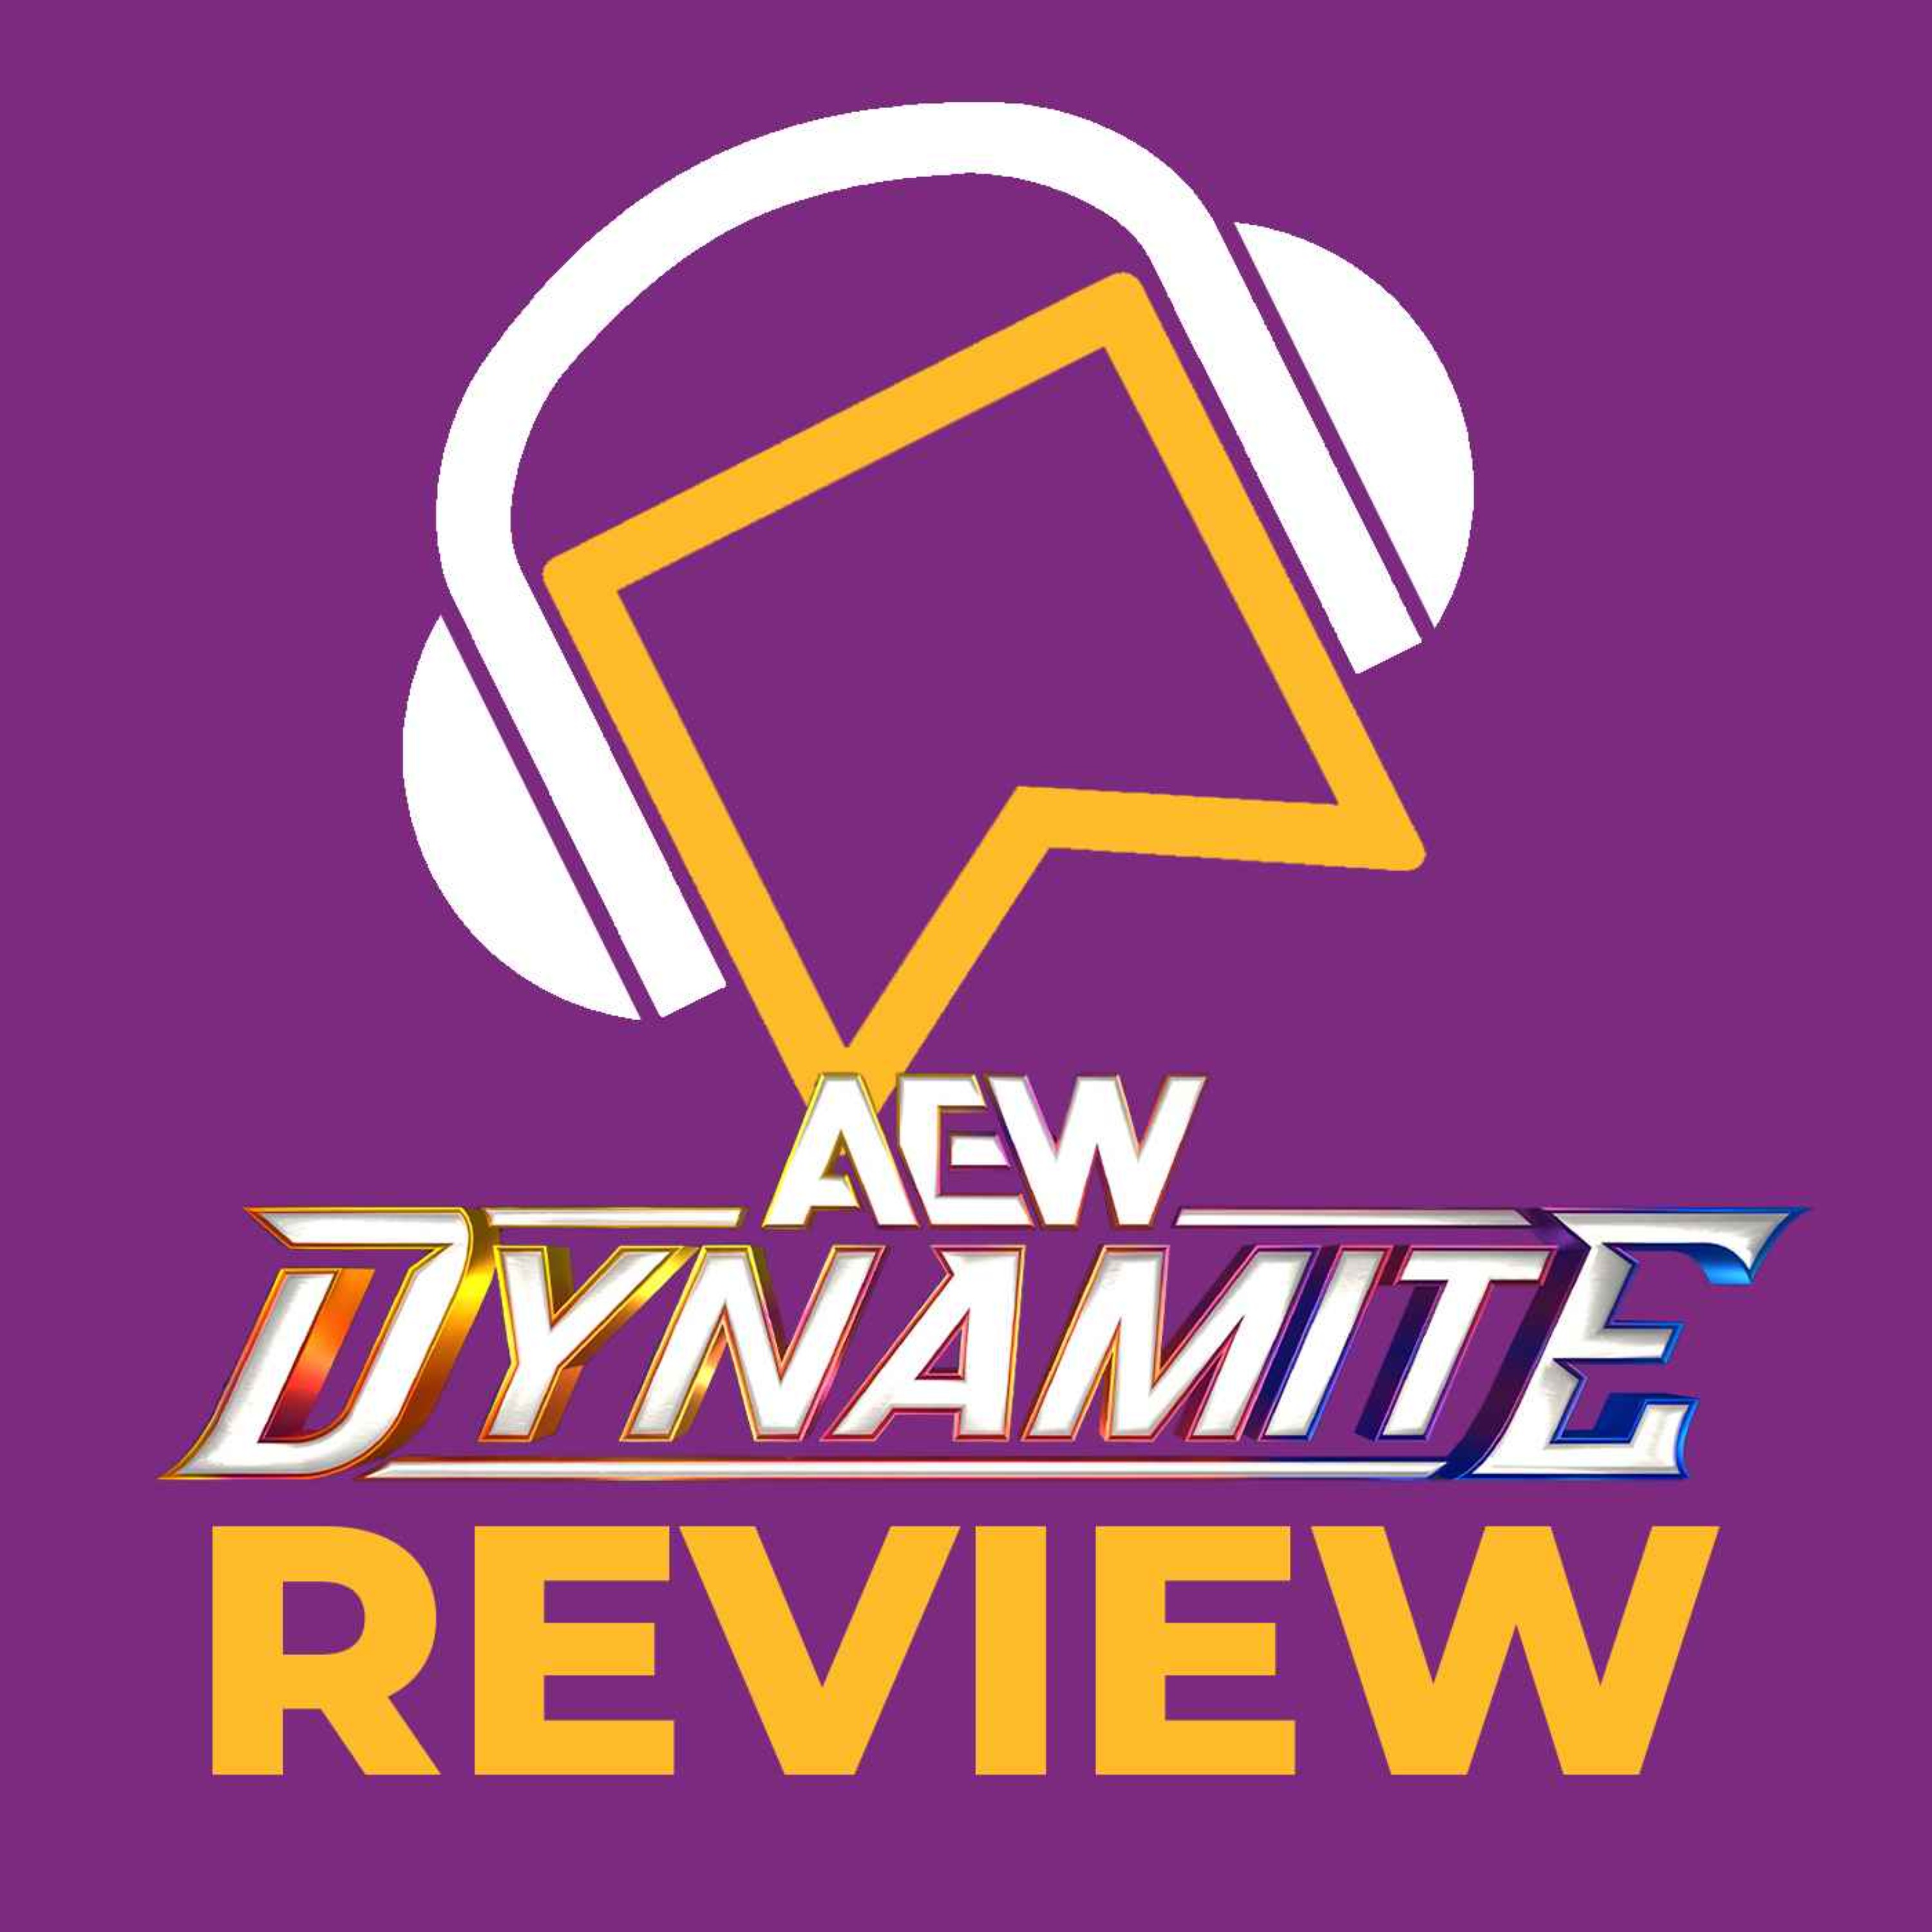 AEW Dynamite Review - HUGE Anarchy In The Arena Developments! Adam Copeland Vs. Brody King - No DQ! The Mogul Embassy BETRAY Swerve! Toni Storm Turns Heel Again?!